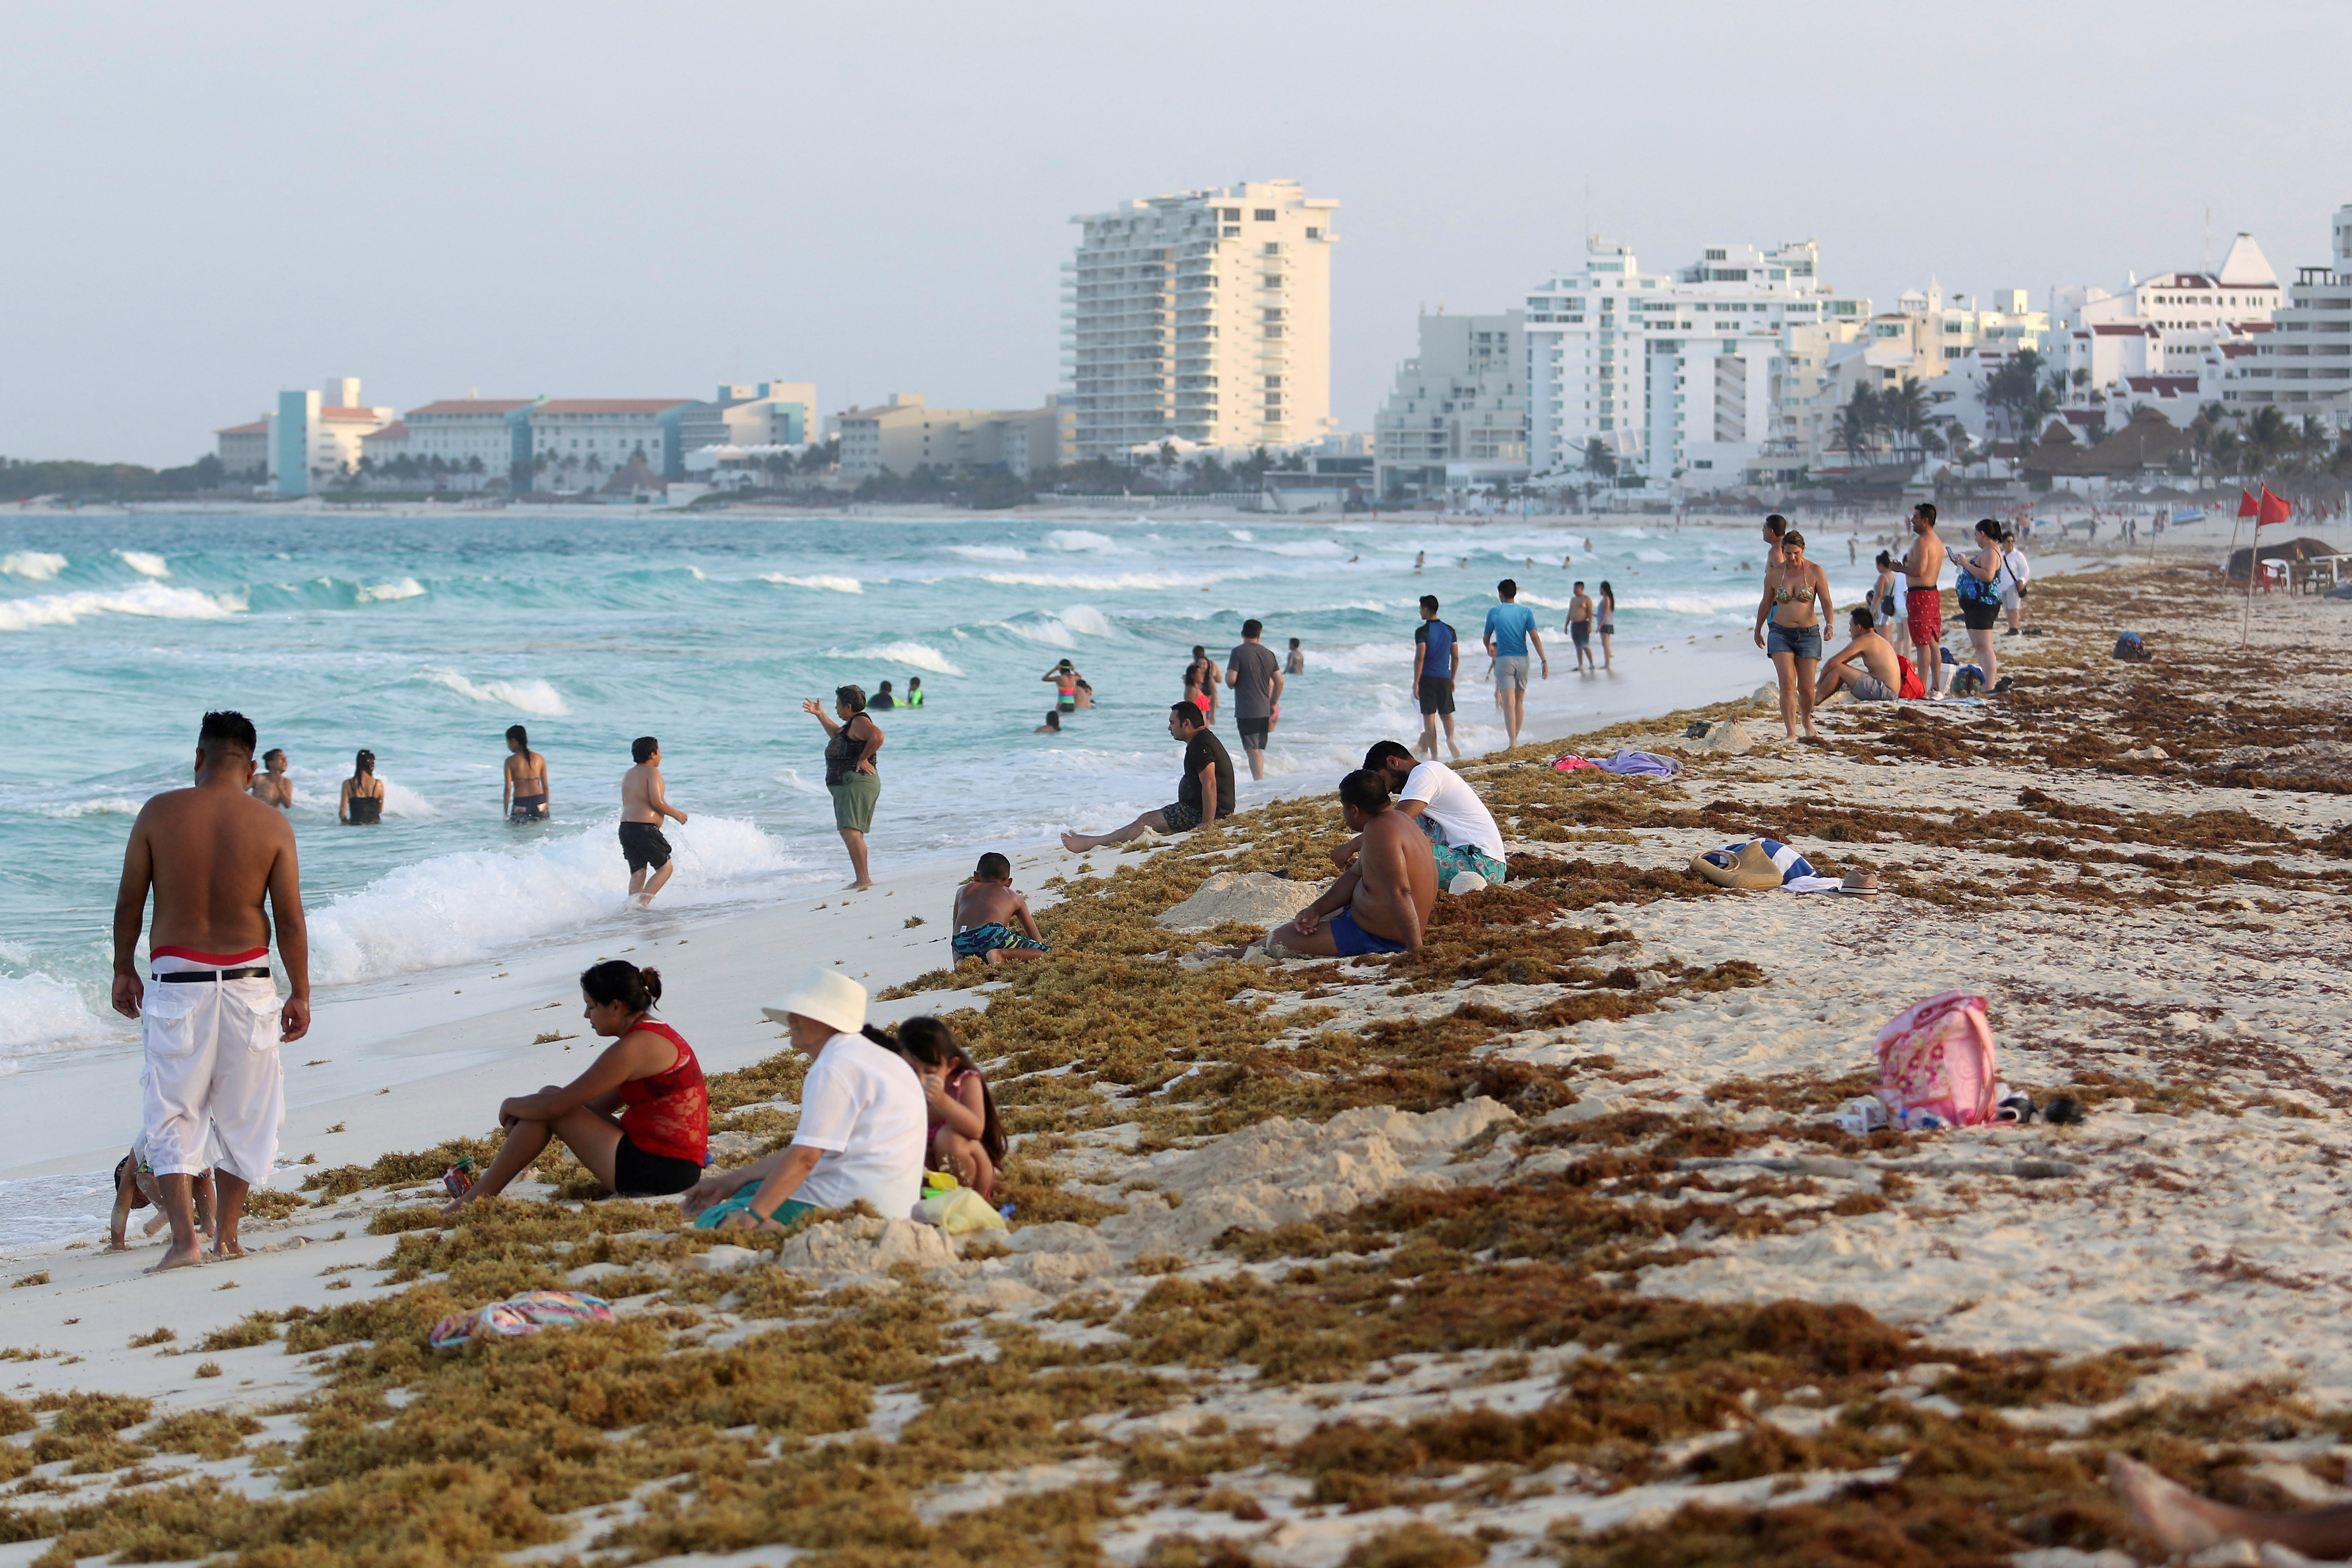 Tourists are seen on a beach covered with seaweed in Cancun